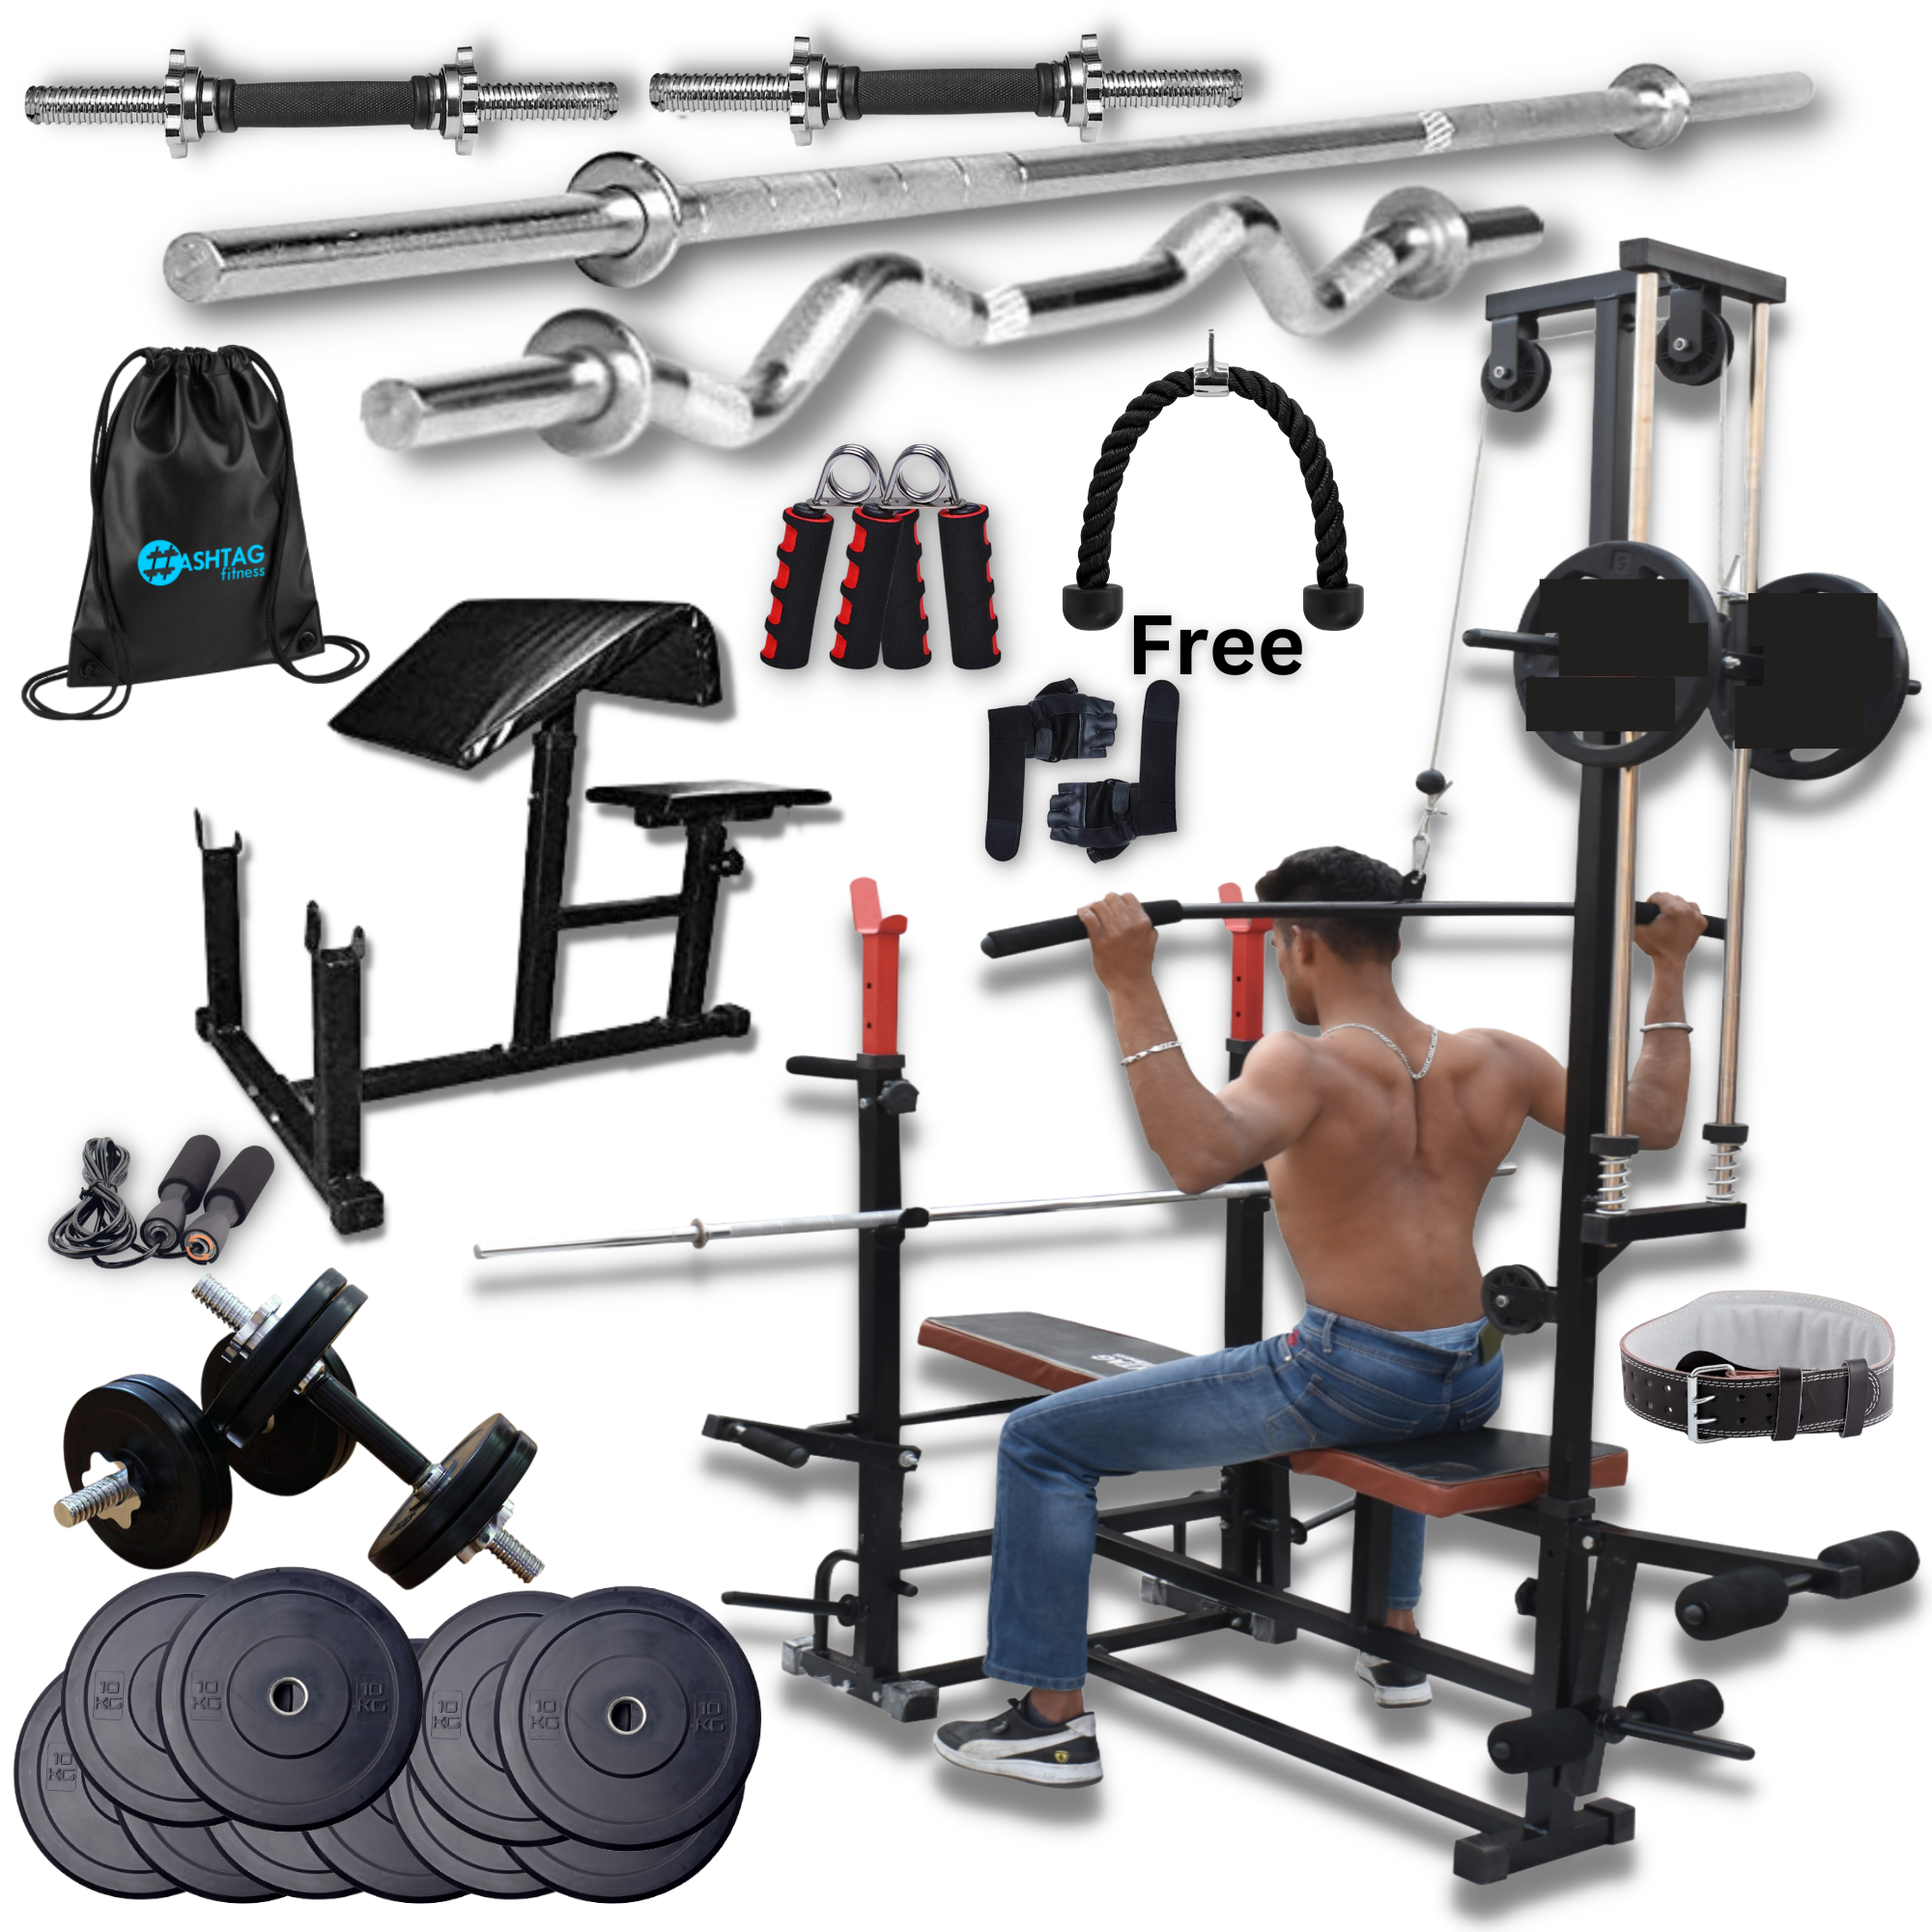 gym accessories for men - Hashtag Fitness : Online gym equipments for home